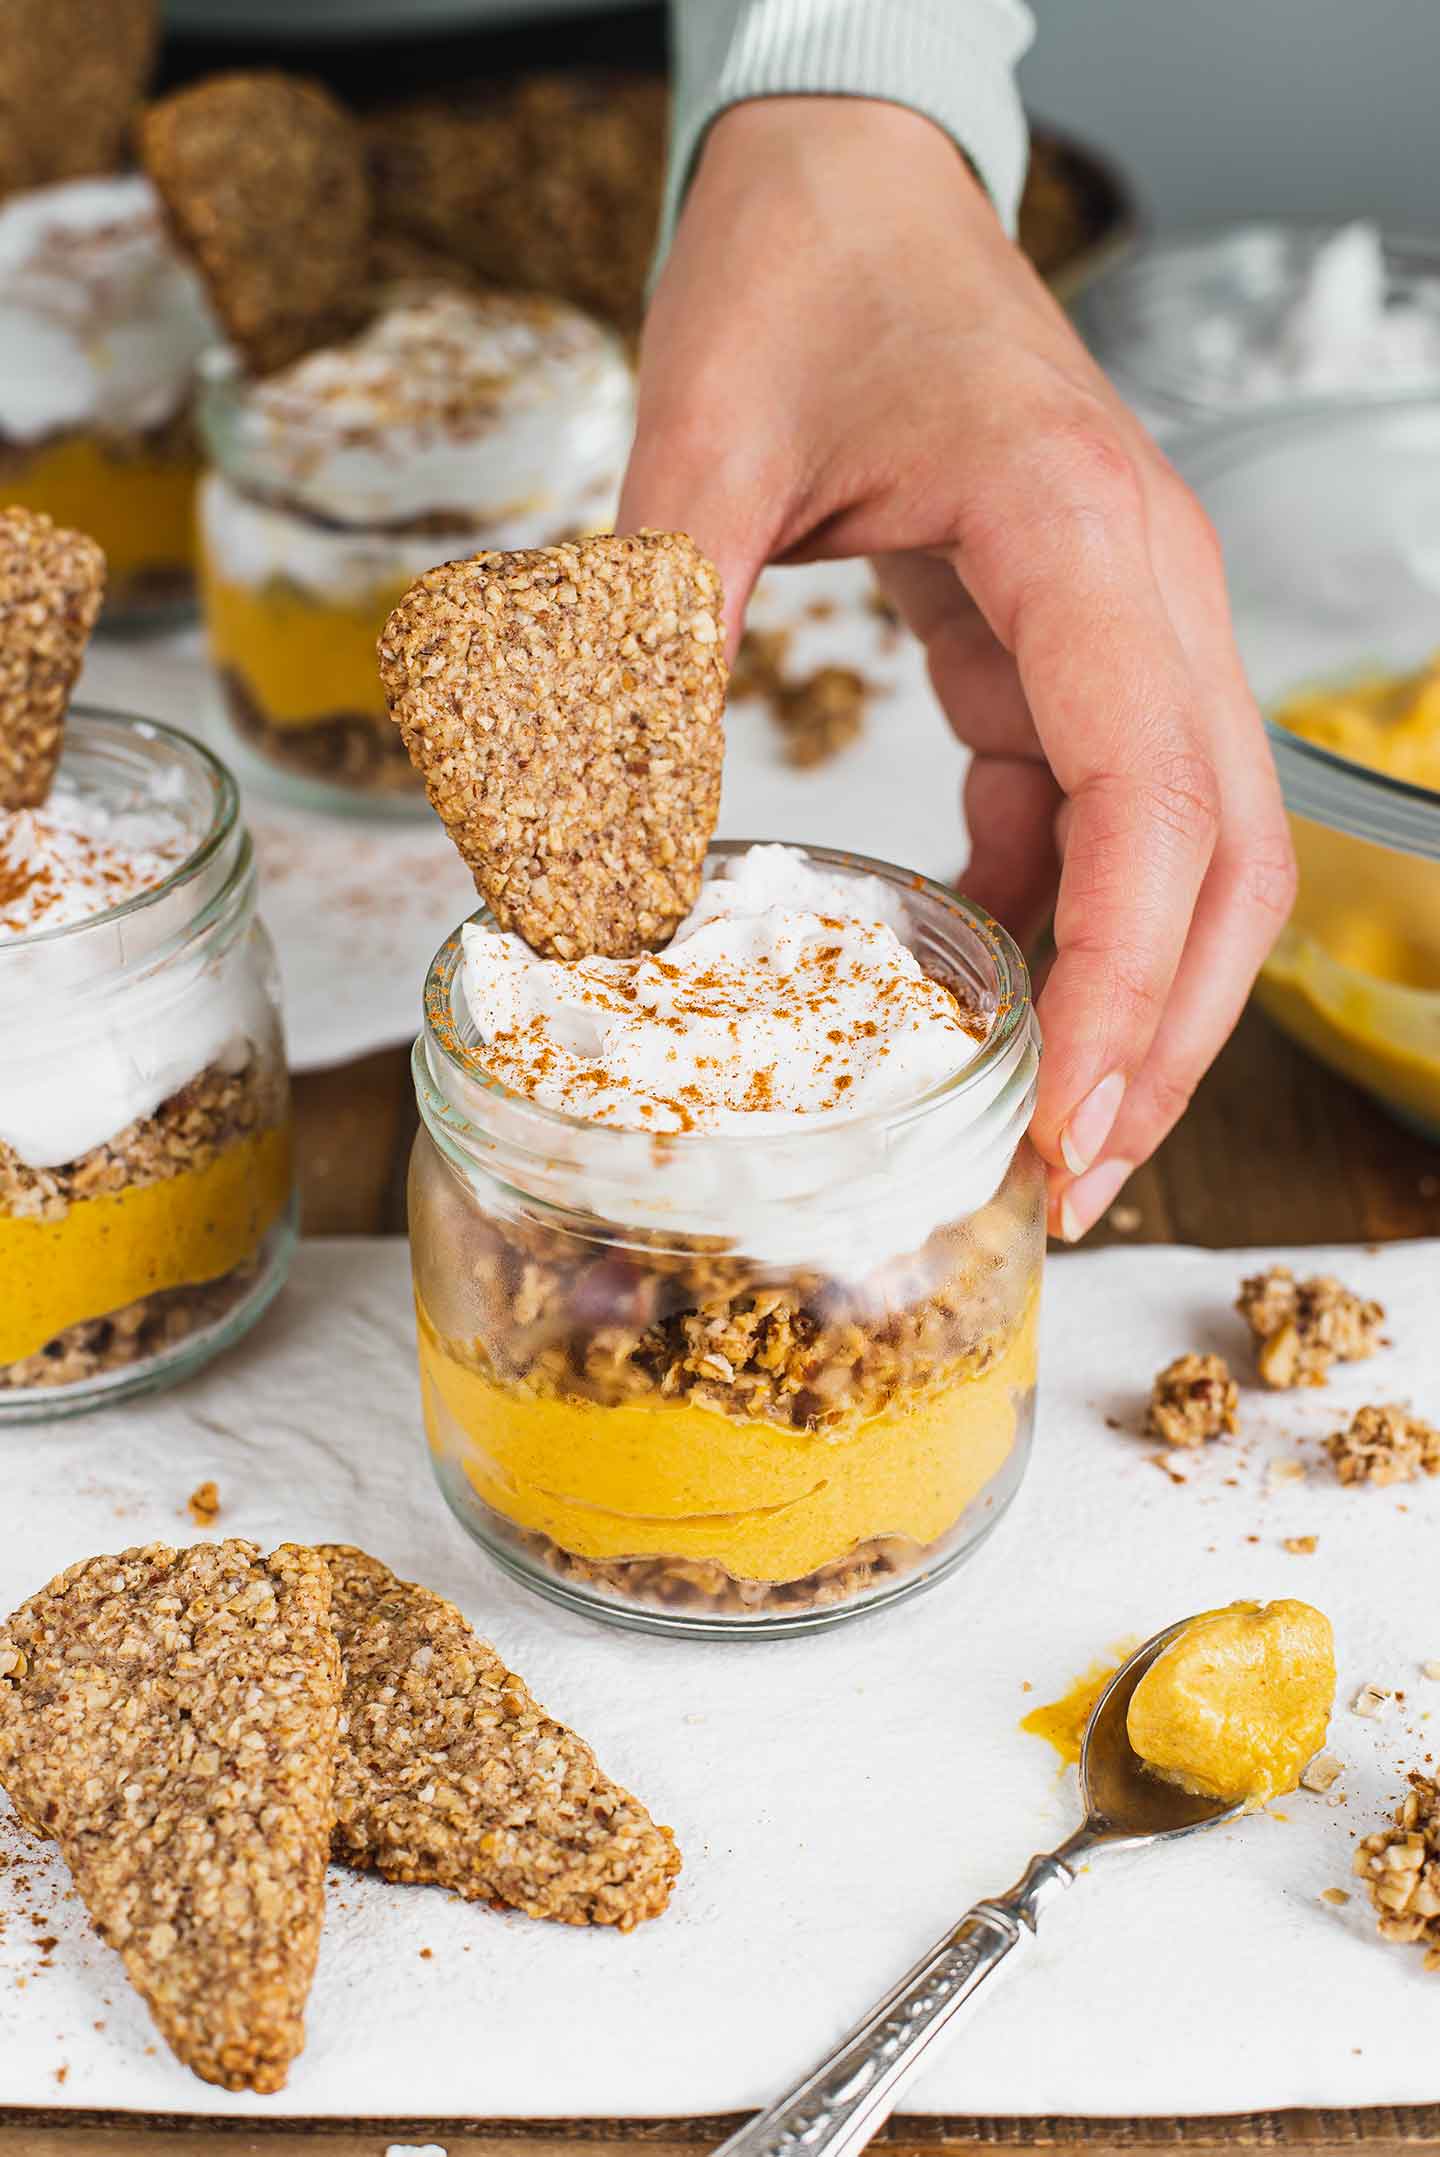 Side view of a hand placing a personal pumpkin pie parfait on a white tray. Creamy pumpkin mousse is visible between two layers of granola. Fluffy whipped cream tops it off and a pie shaped cookie sticks up from the whip.